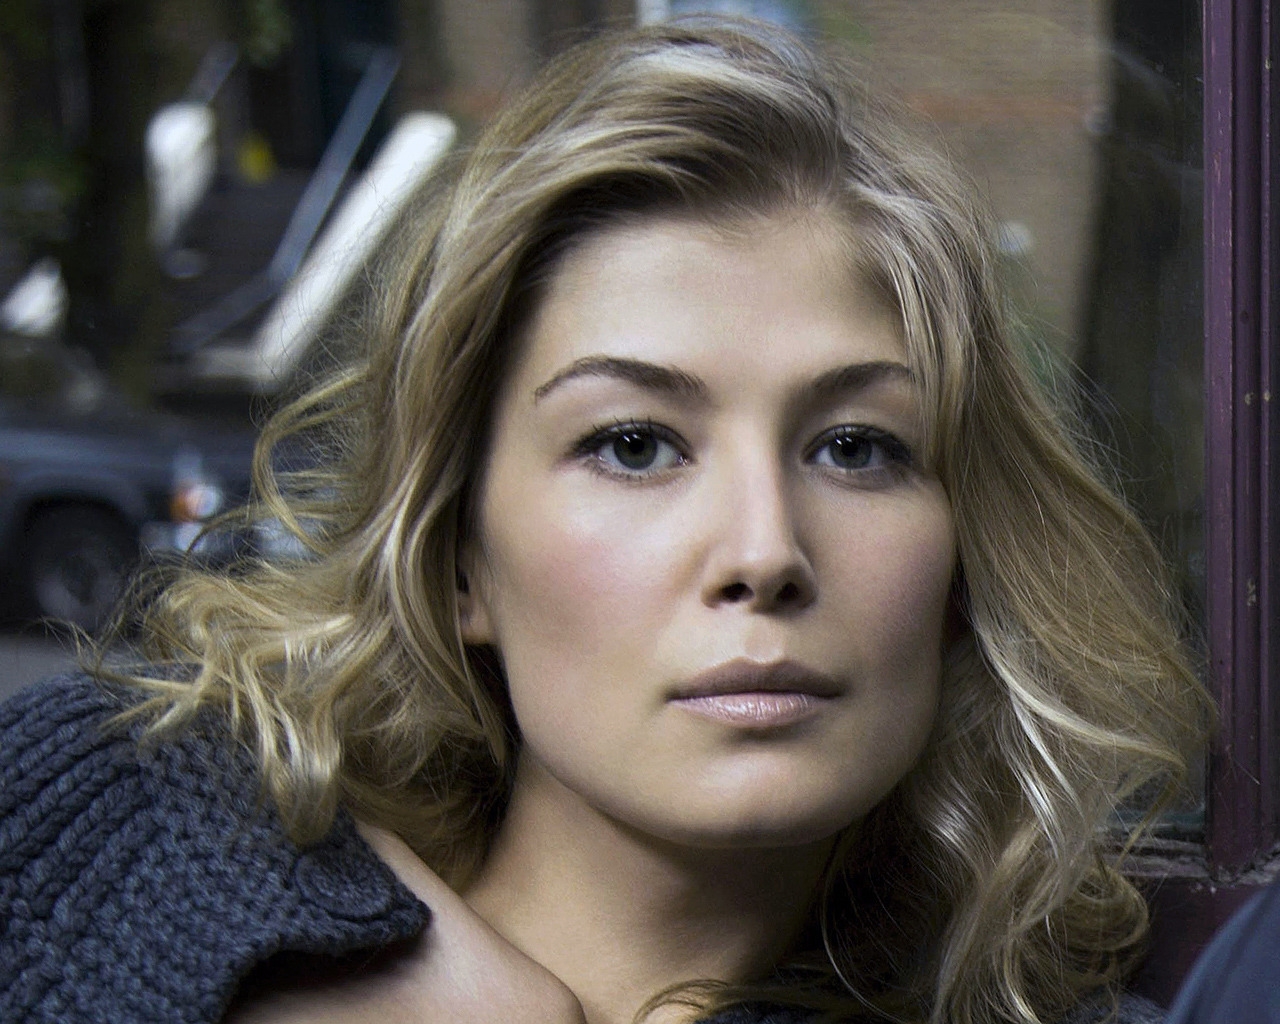 Rosamund Pike Look for 1280 x 1024 resolution